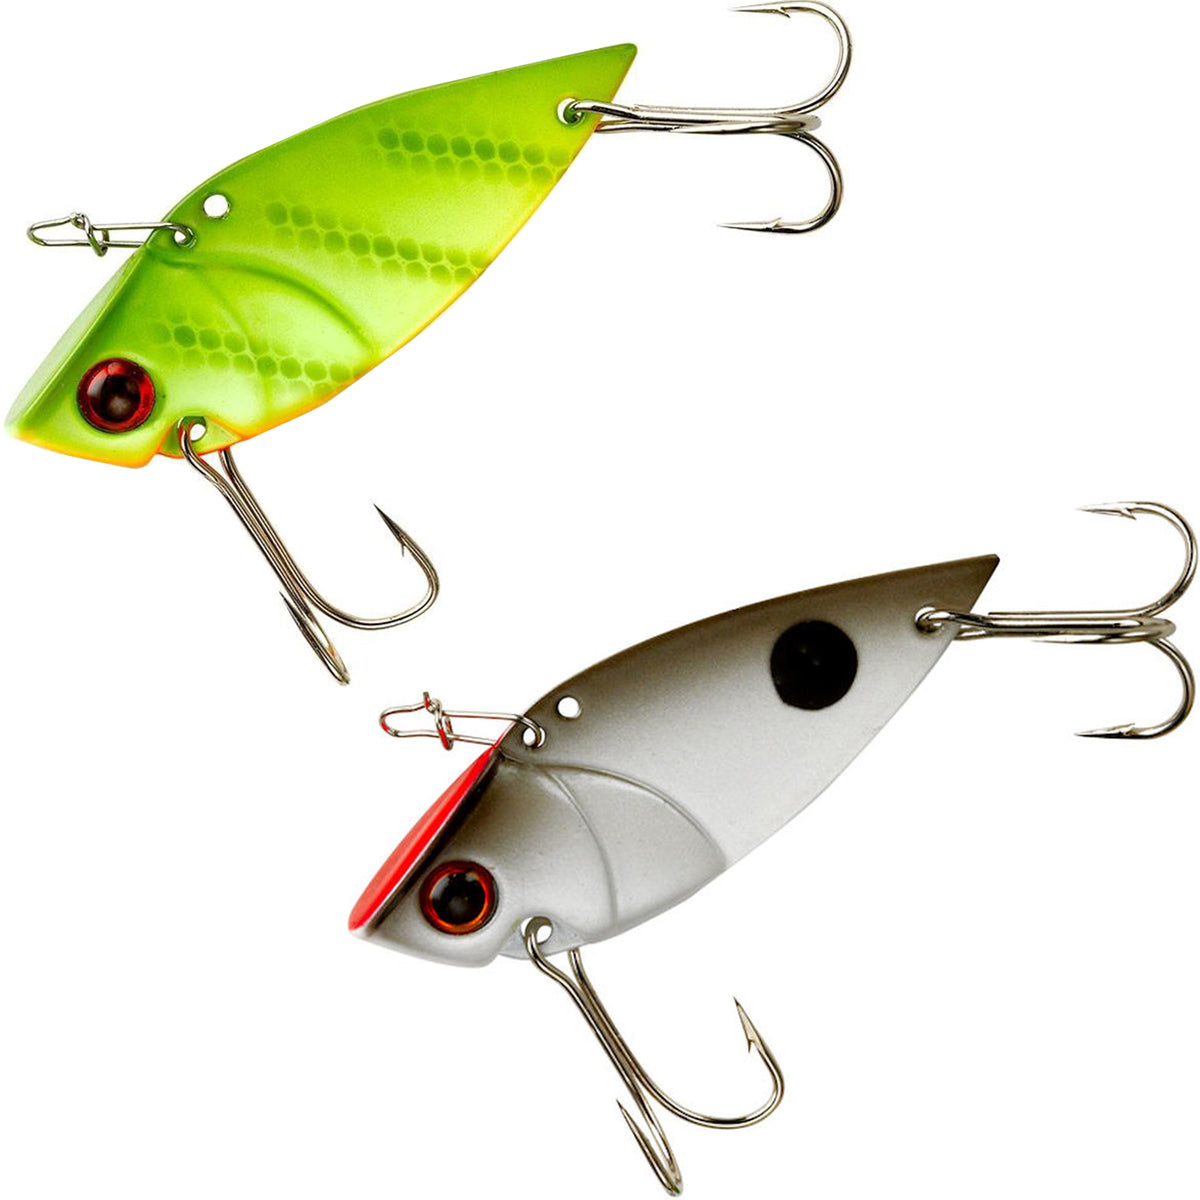 Cotton Cordell Little Mickey Spoon 1/4 oz Fishing Lures